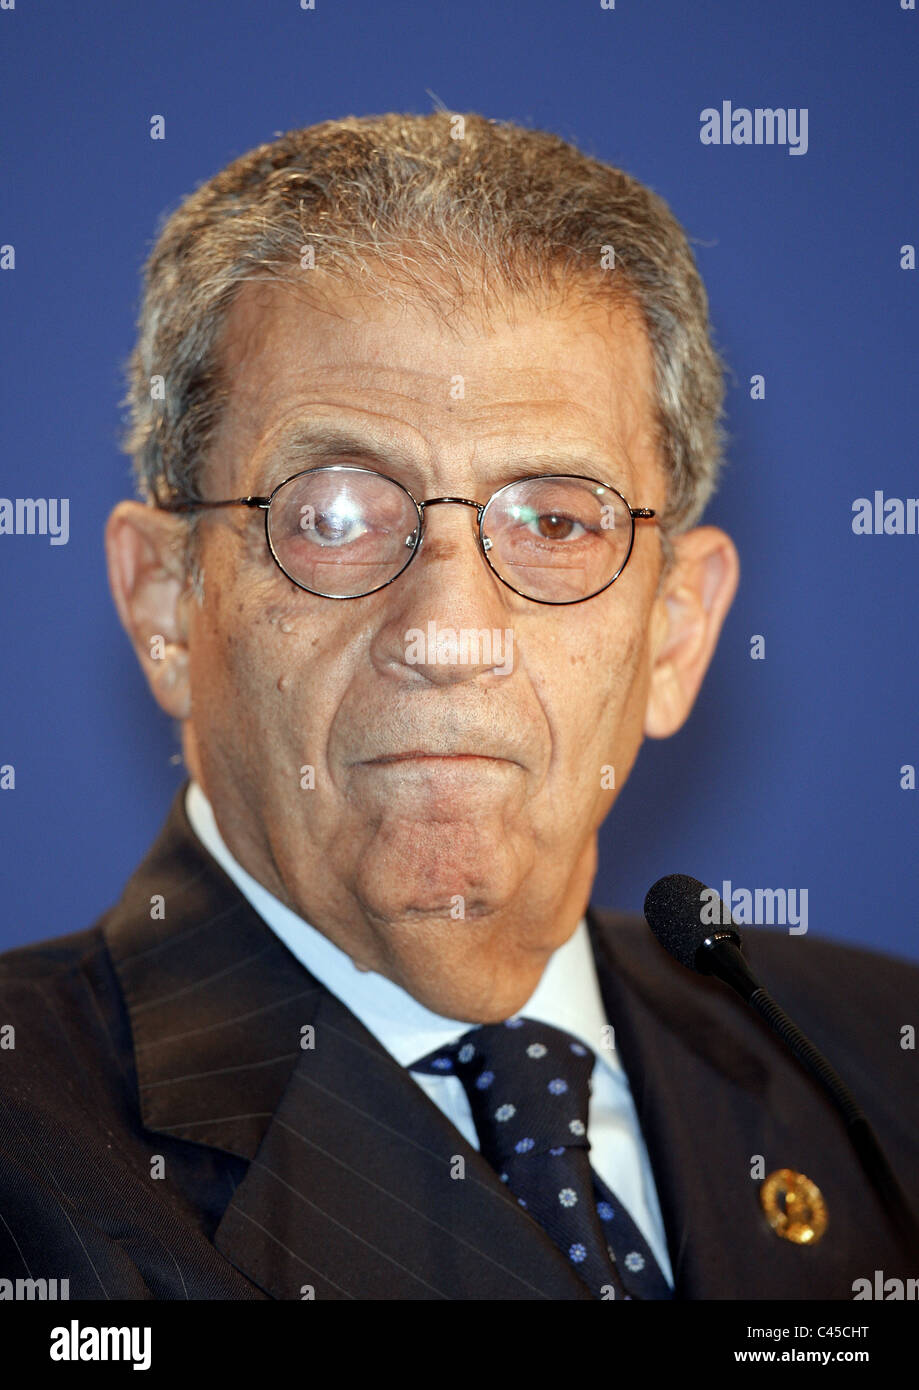 ARM MOUSSA SECRETARY GENERAL OF THE ARAB 27 May 2011 INTERNATIONAL MEDIA CENTRE DEAUVILLE FRANCE Stock Photo